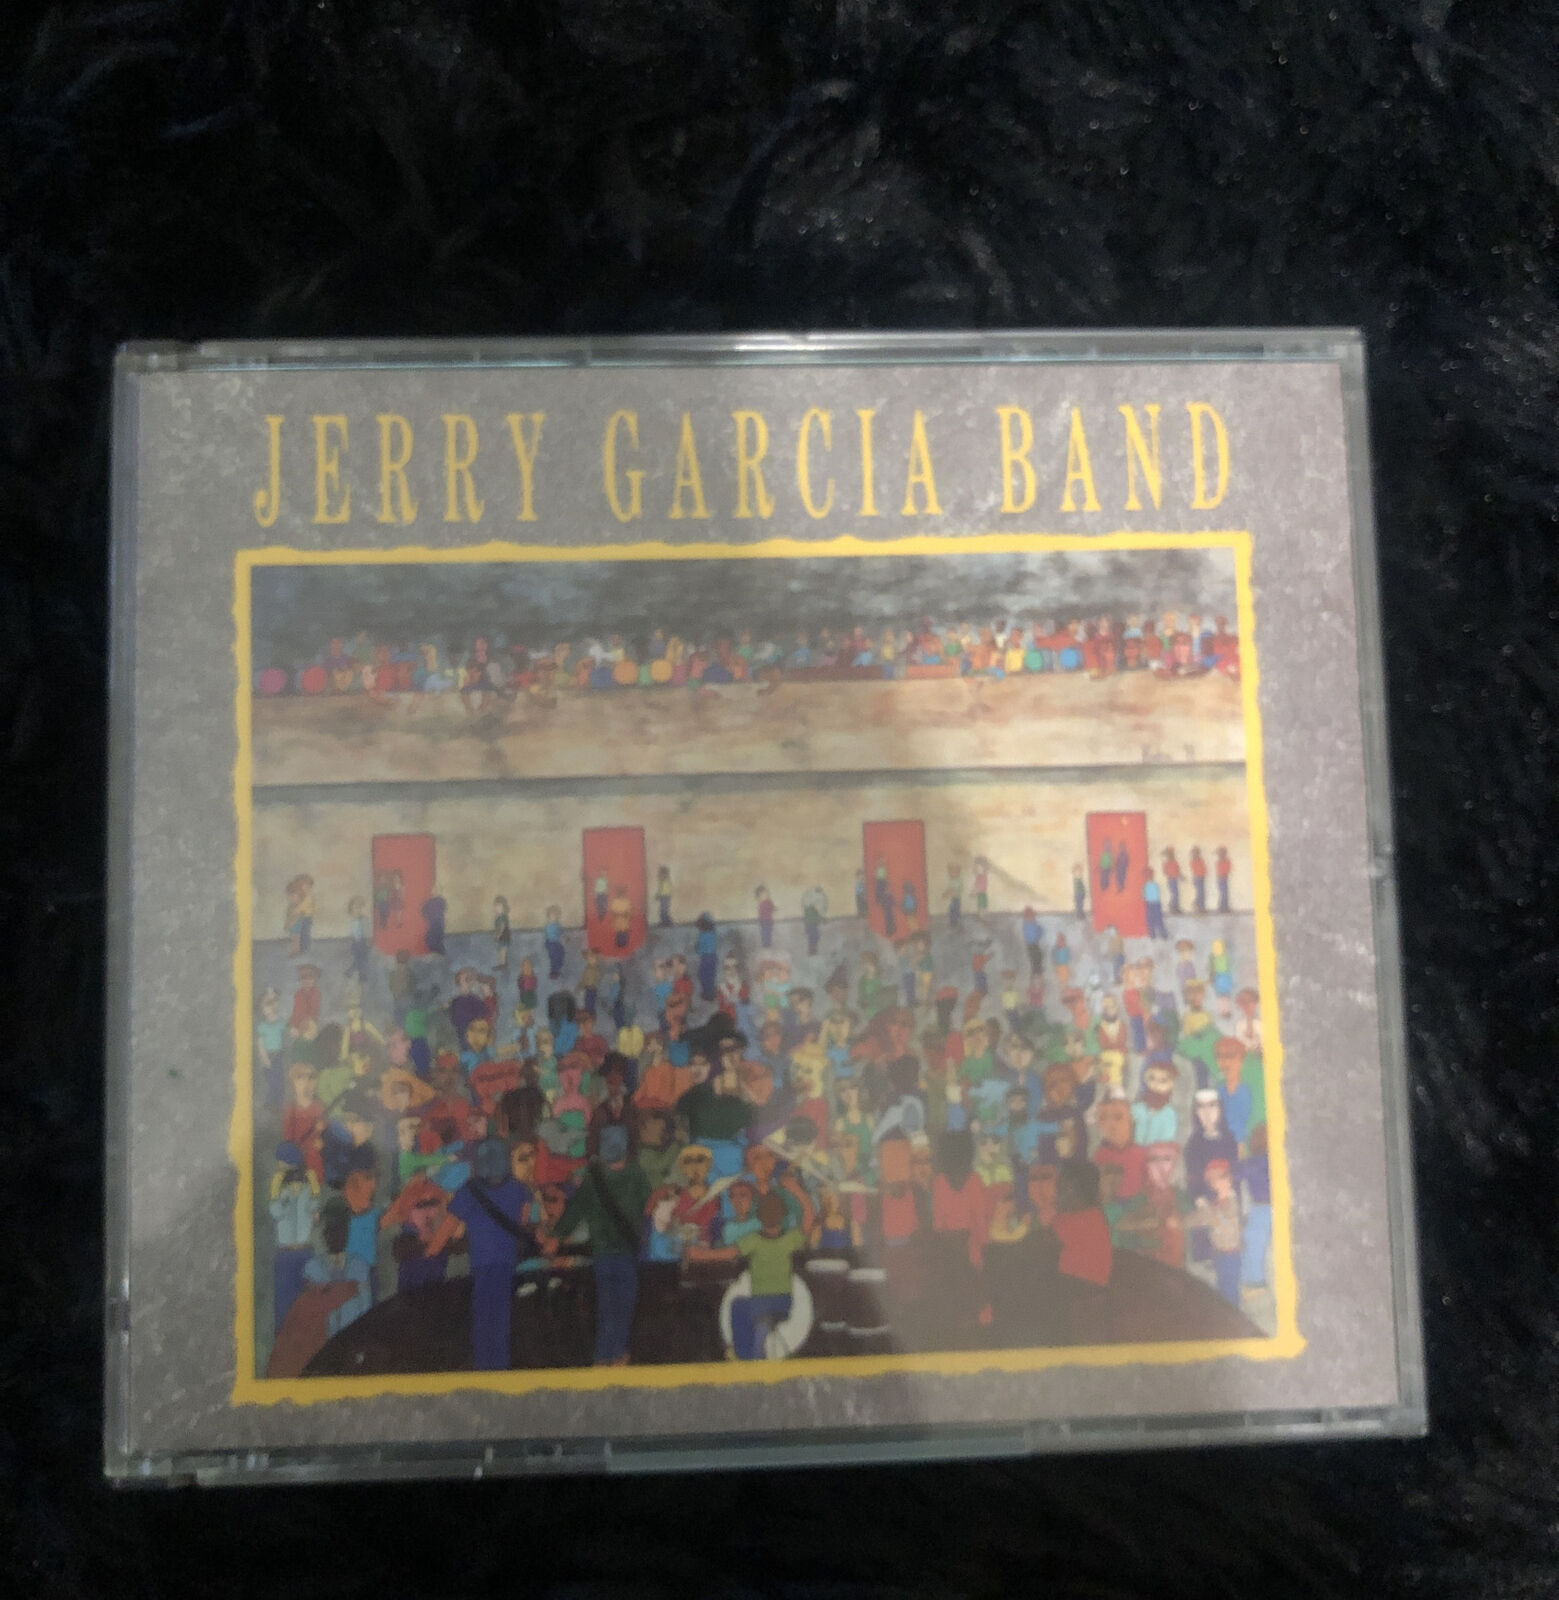 Jerry Garcia Band by Jerry Garcia Band (CD, Aug-1991, 2 Discs, Arista)